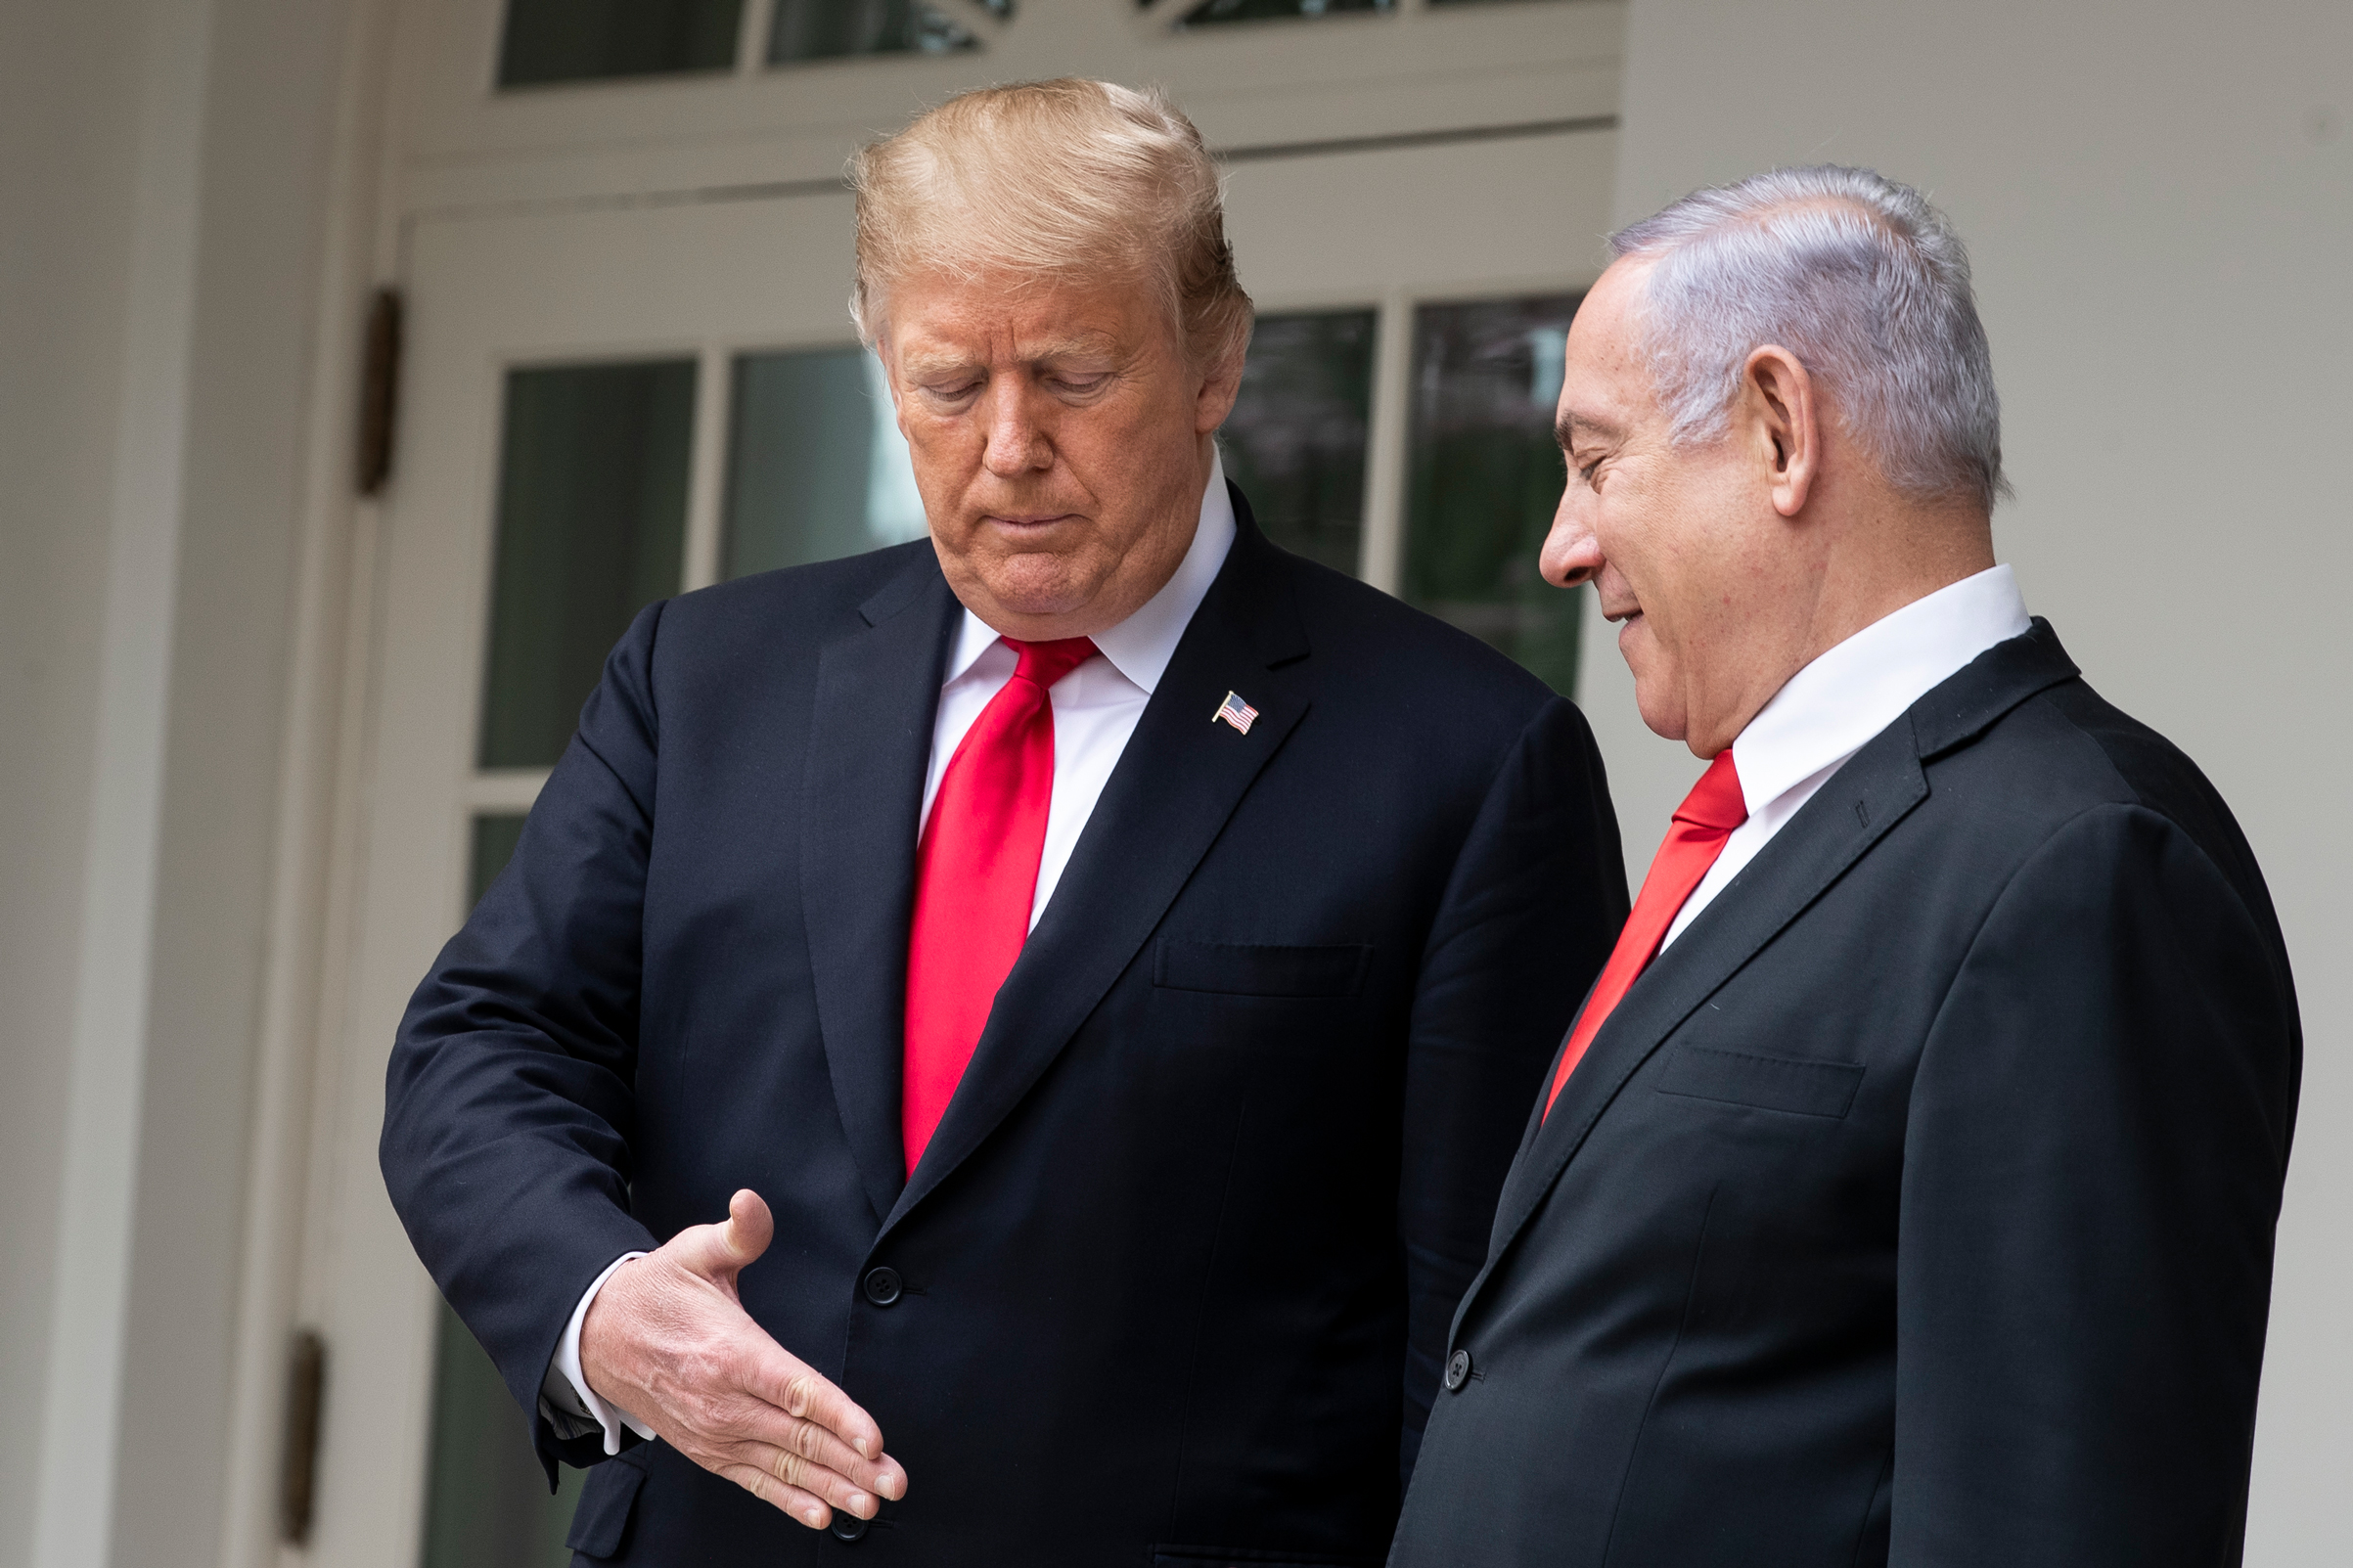 U.S. President Donald Trump and Prime Minister of Israel Benjamin Netanyahu prepare to shake hands prior to a meeting at the White House on March 25, 2019, in Washington, D.C. (Drew Angerer—Getty Images)